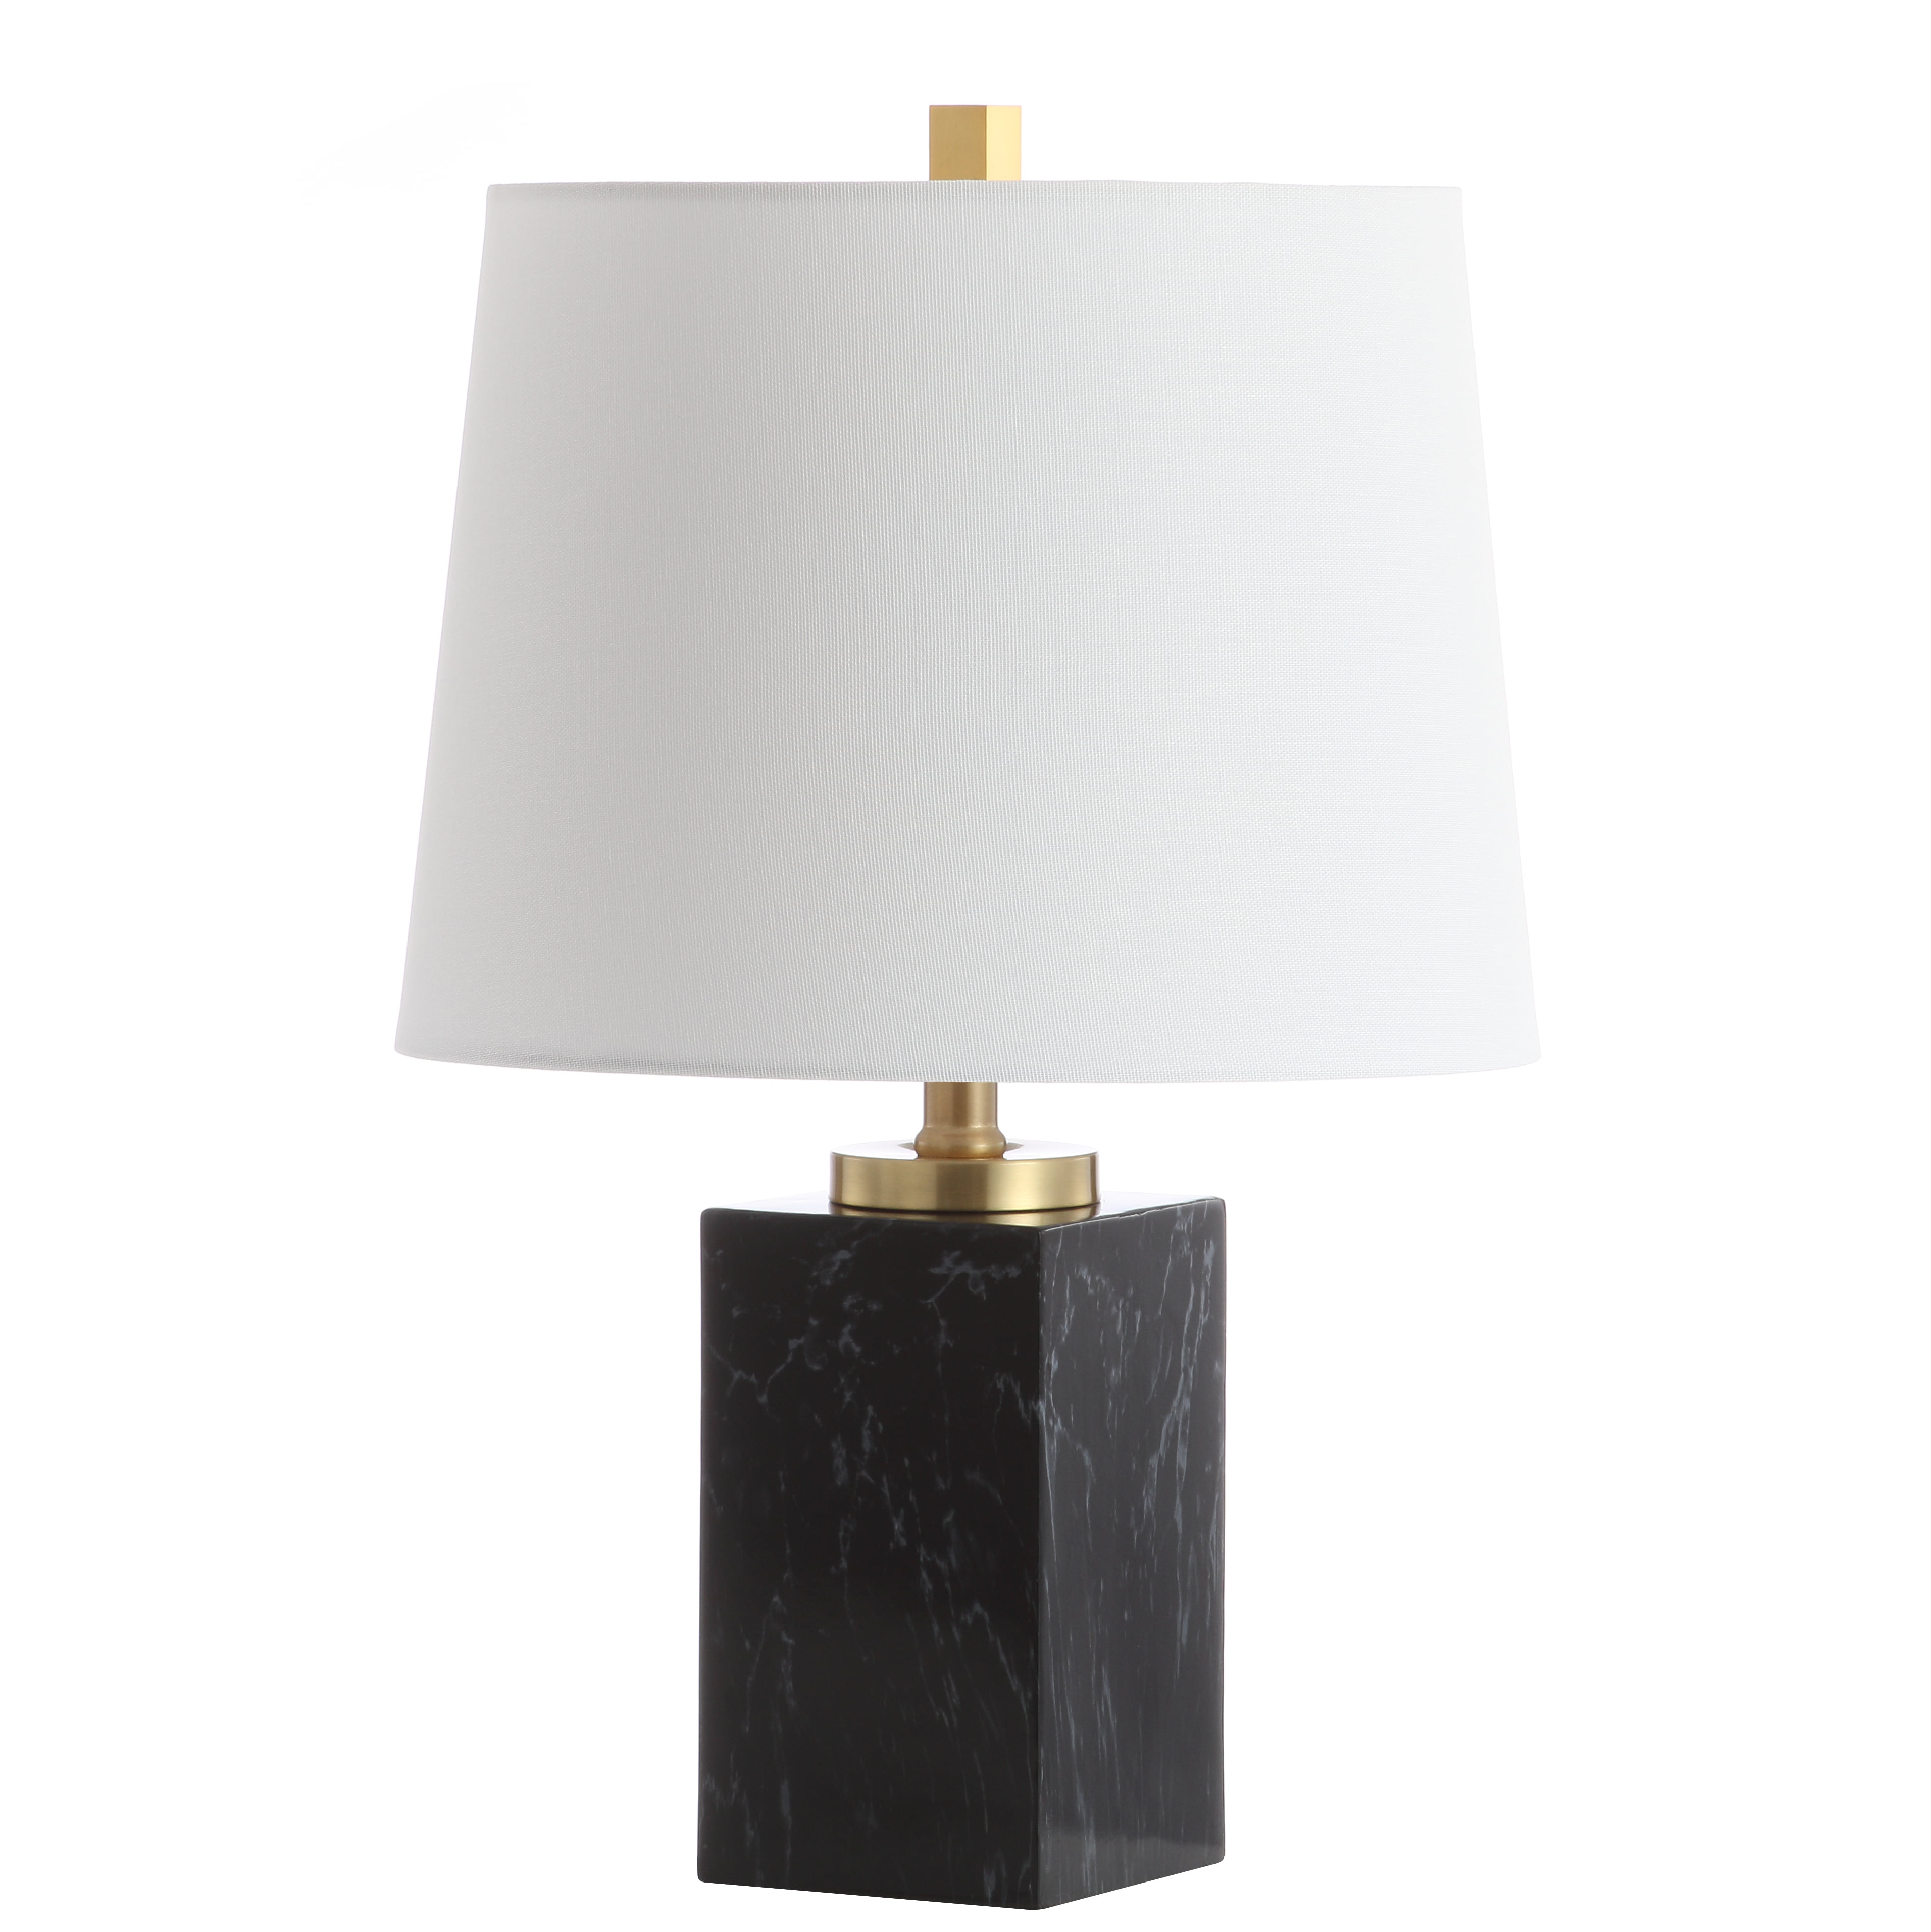 Set of 2 Safavieh Table Lamp 30 in Classic Black Shade Silver Resin Base 